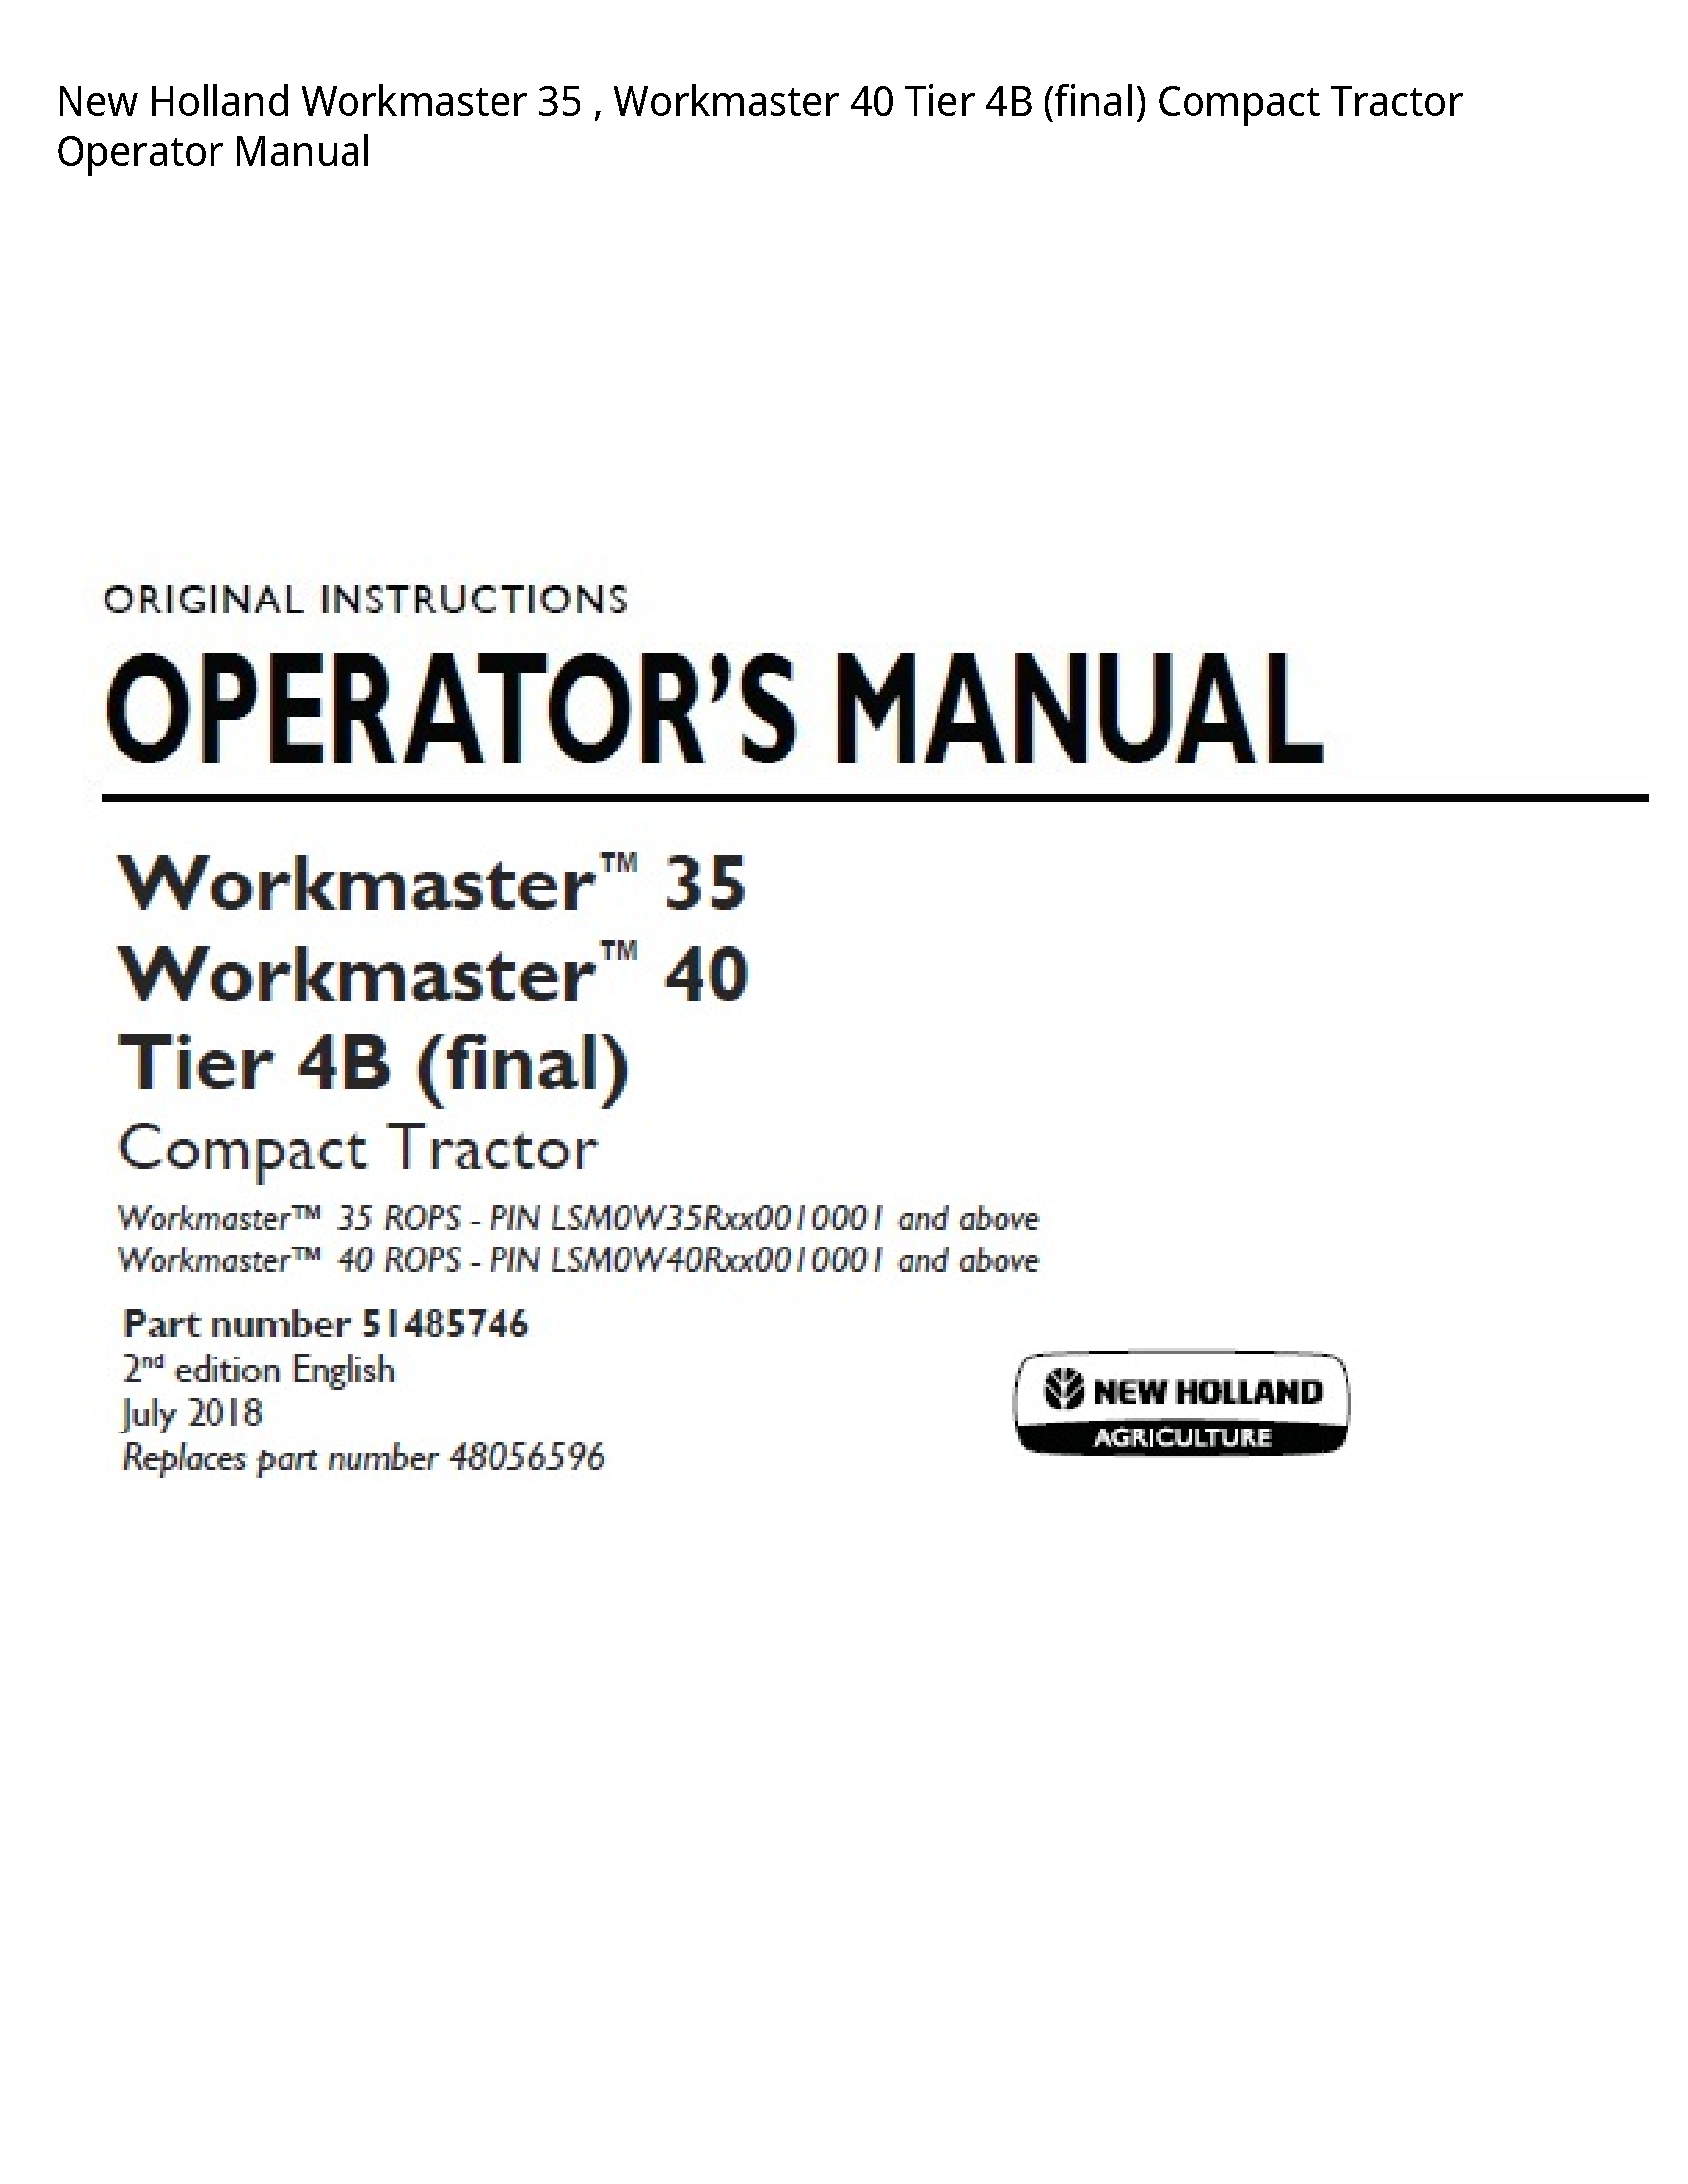 New Holland 35 Workmaster Workmaster Tier (final) Compact Tractor Operator manual